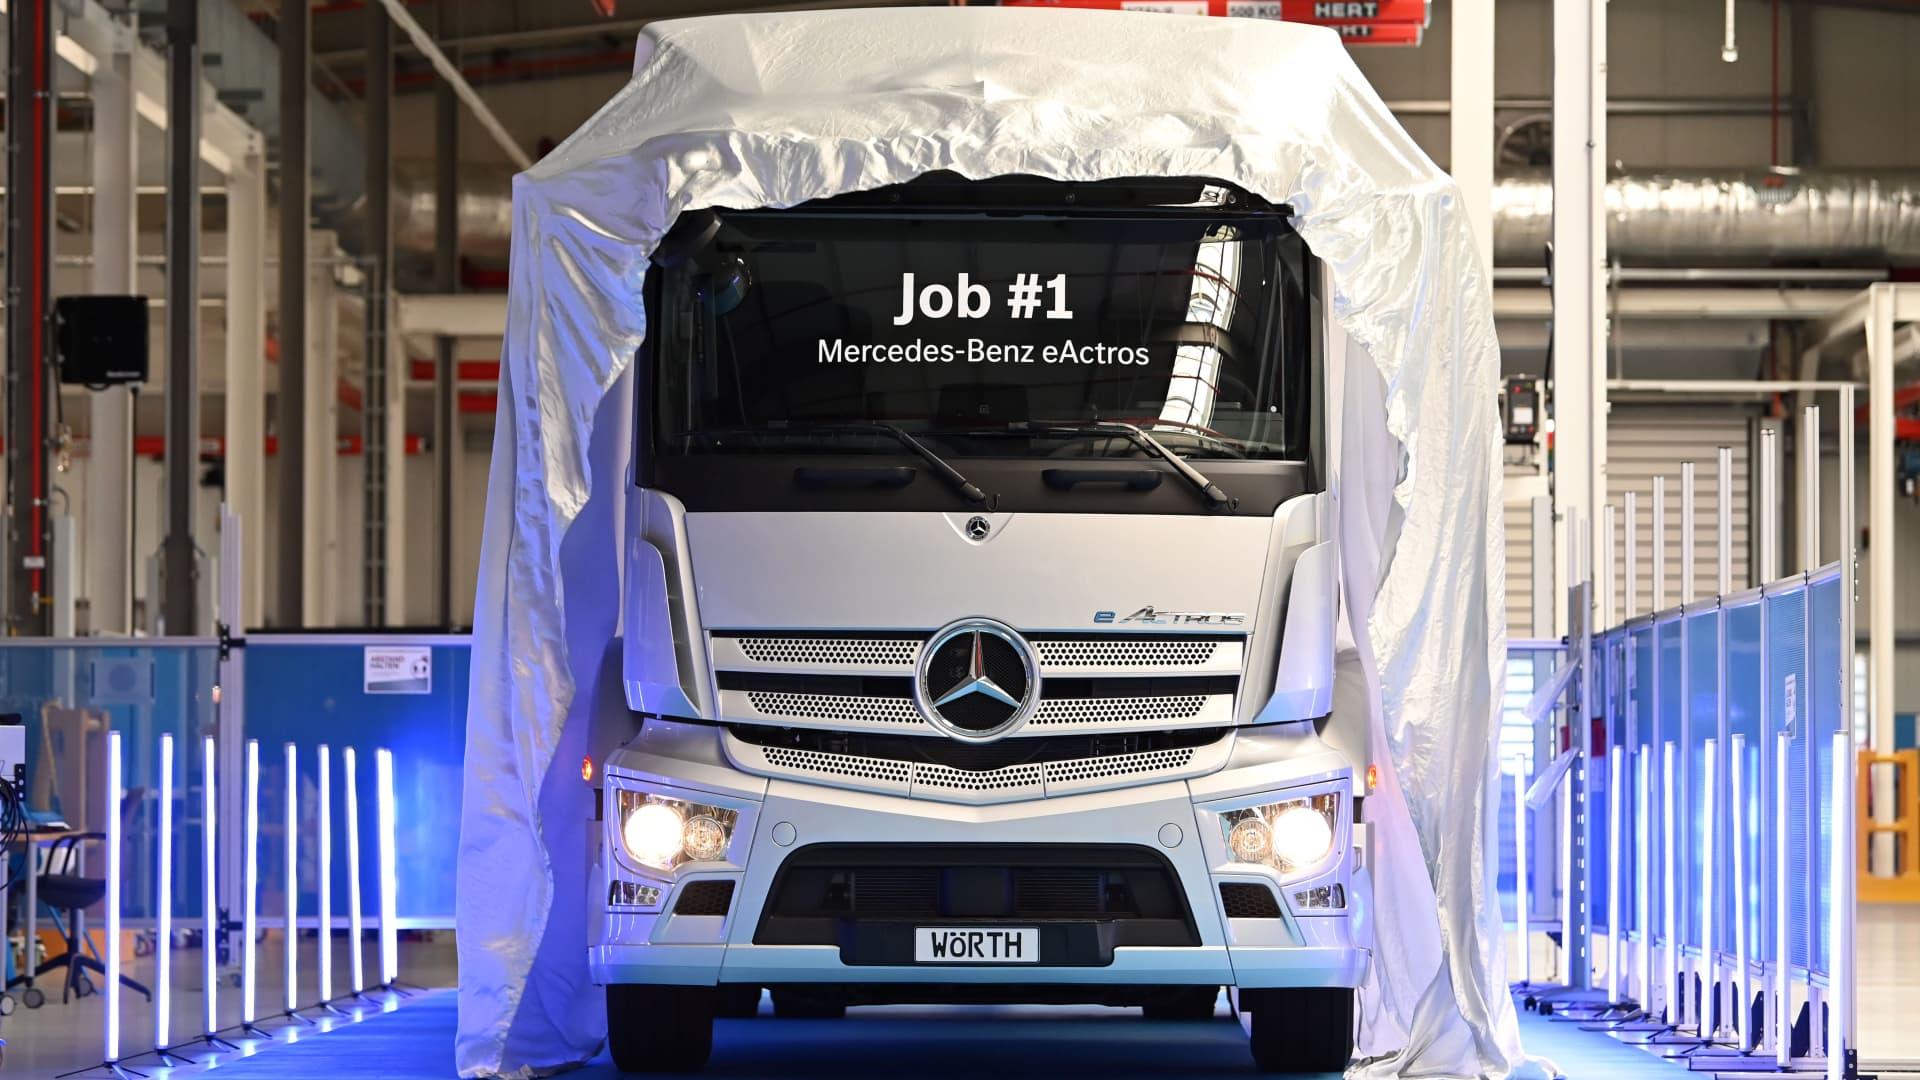 Daimler Truck reached a deal with the U.S. auto workers